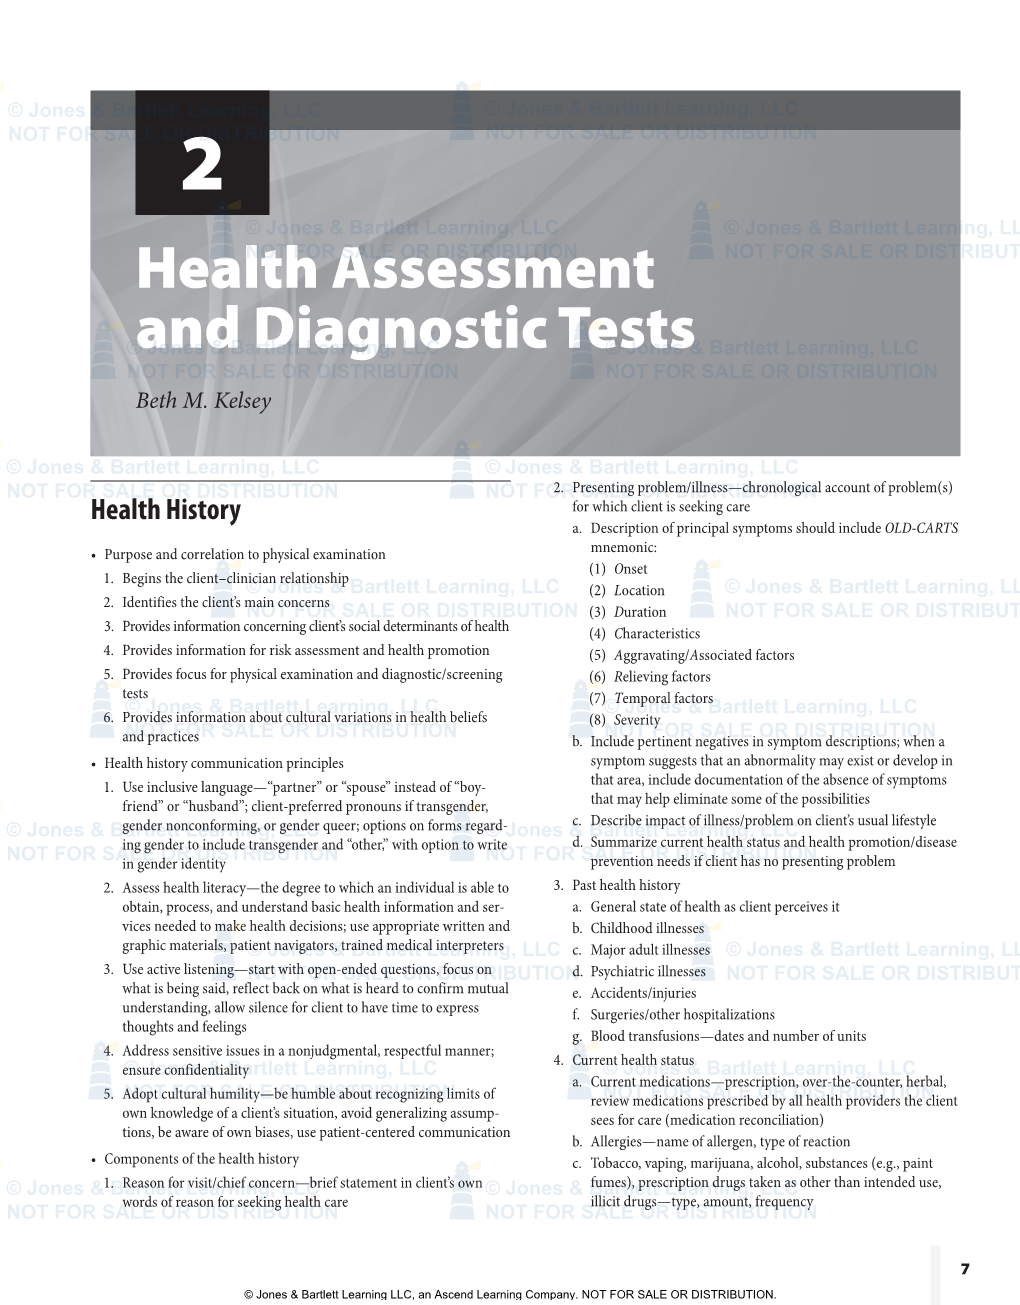 Health Assessment and Diagnostic Tests